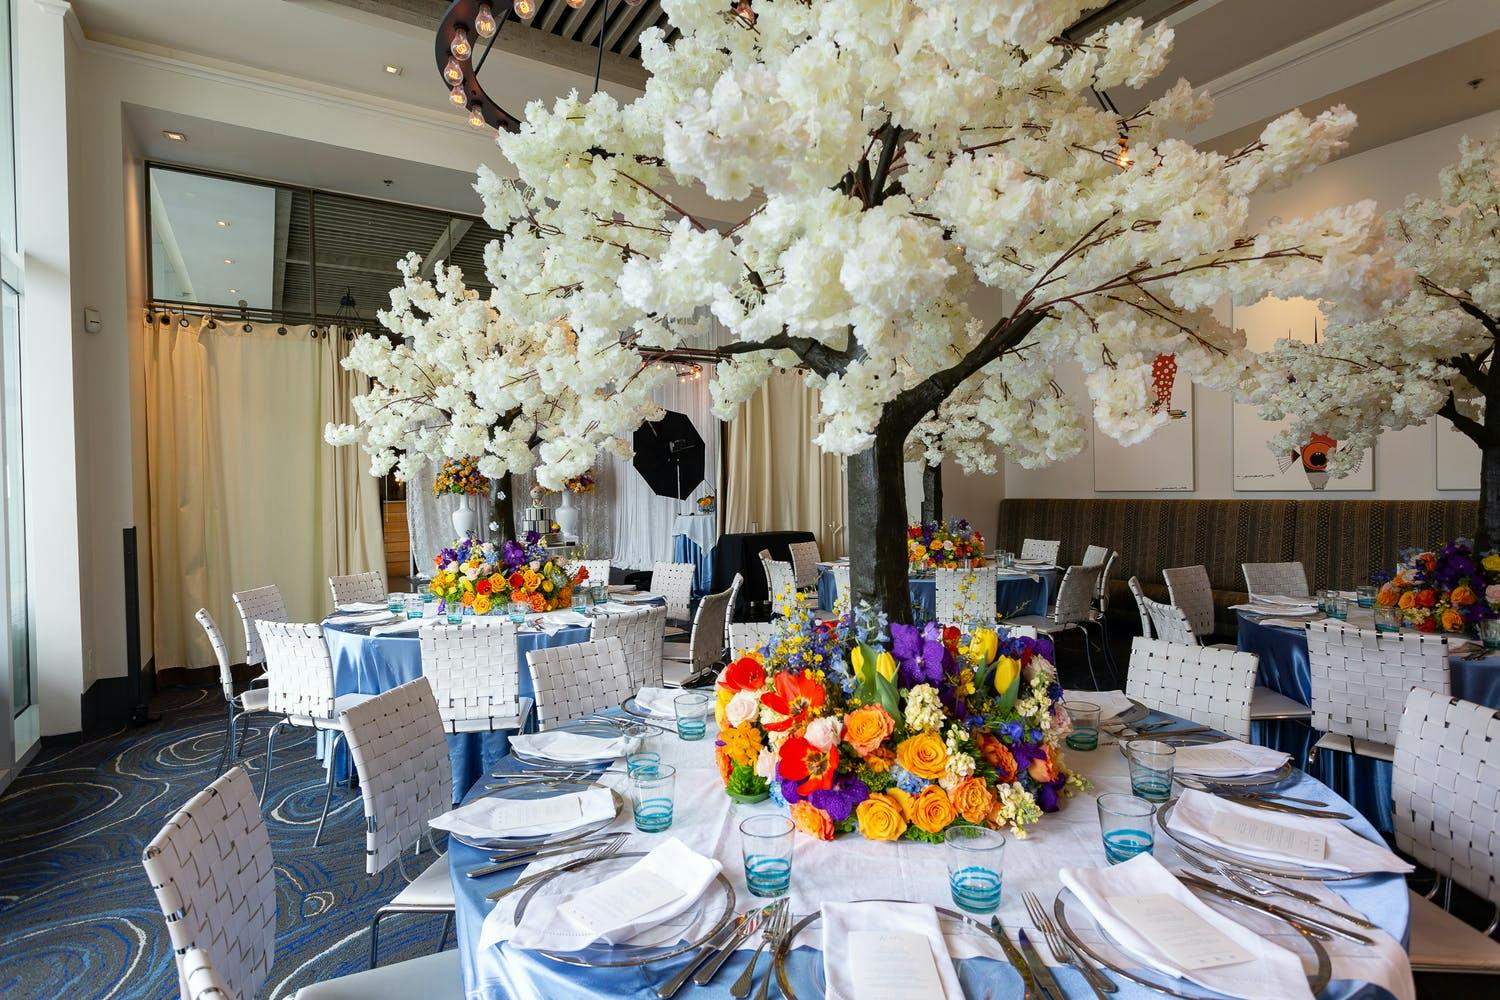 Baby Shower With White Flower Tree Top Centerpieces Surrounded By Colorful Floral Wreaths | PartySlate